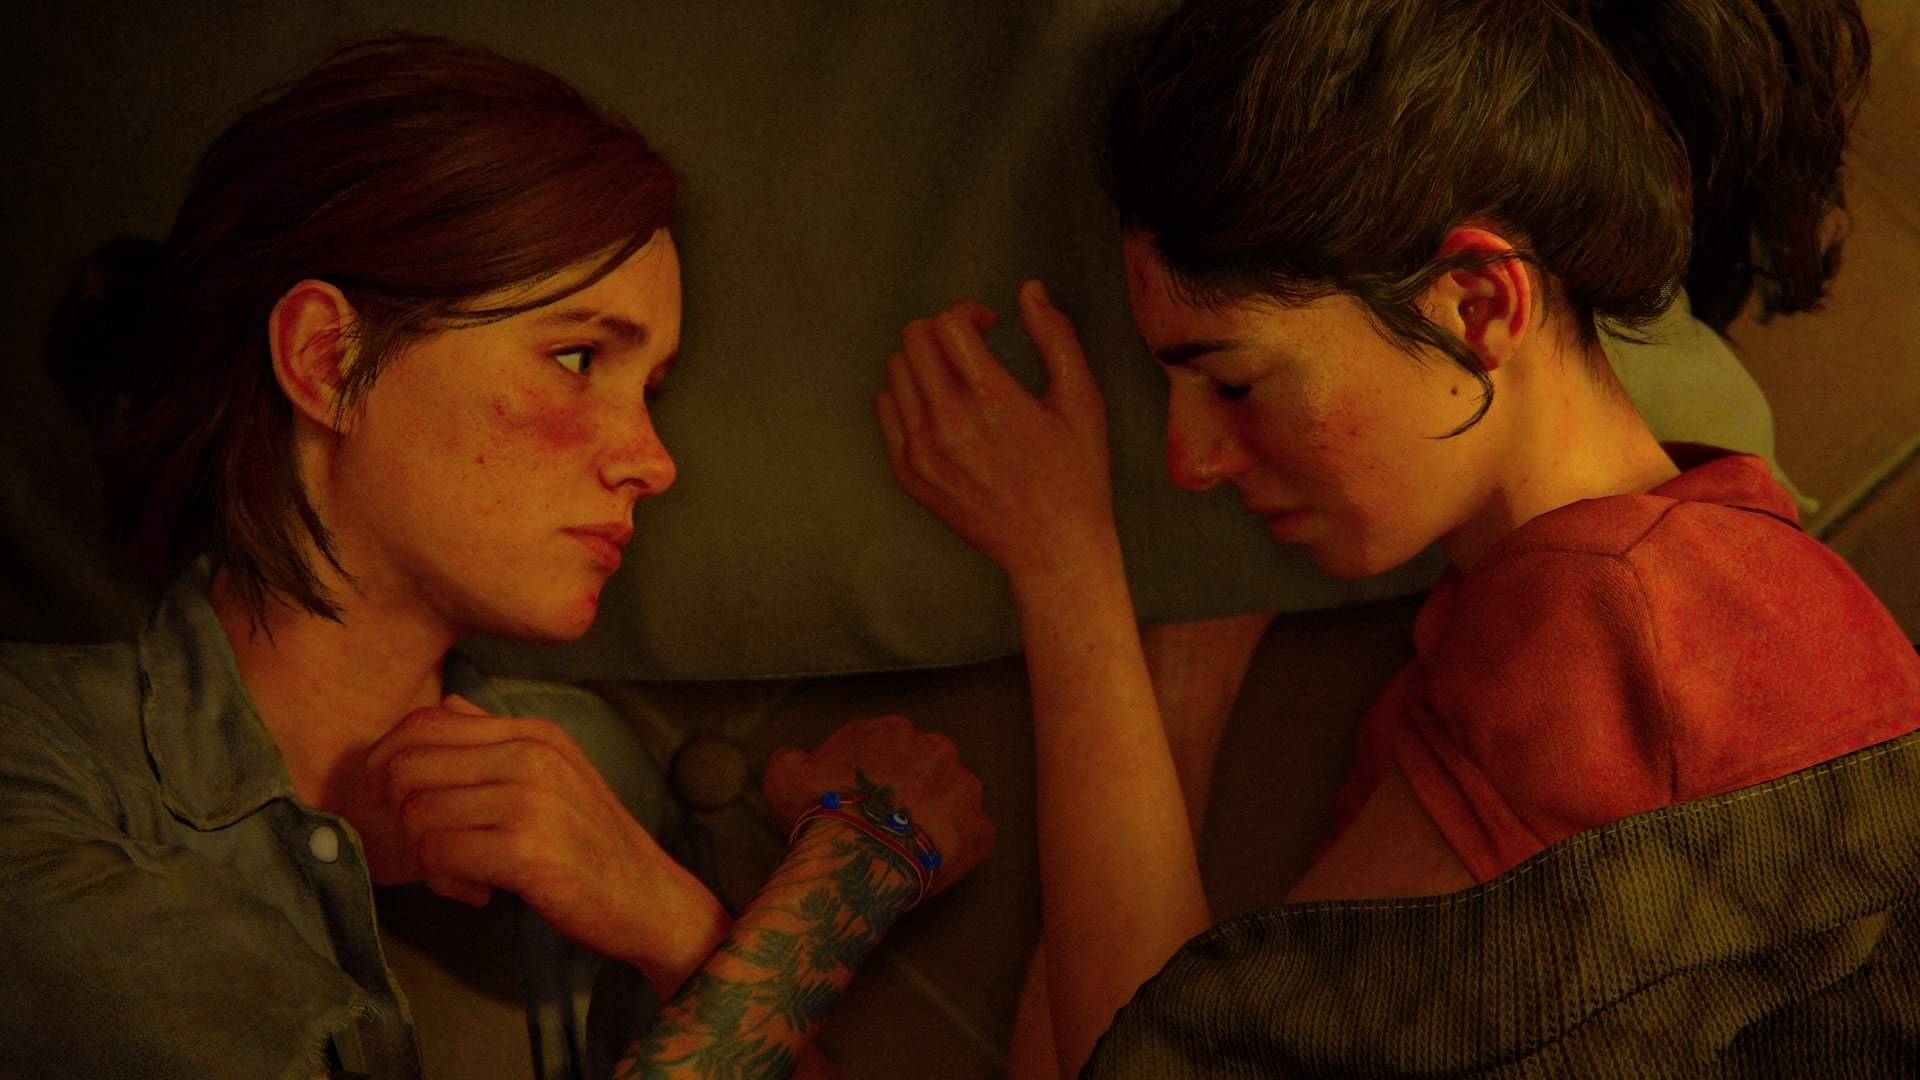 Download Joel and Ellie team up against the dangers of The Last Of Us.  Wallpaper